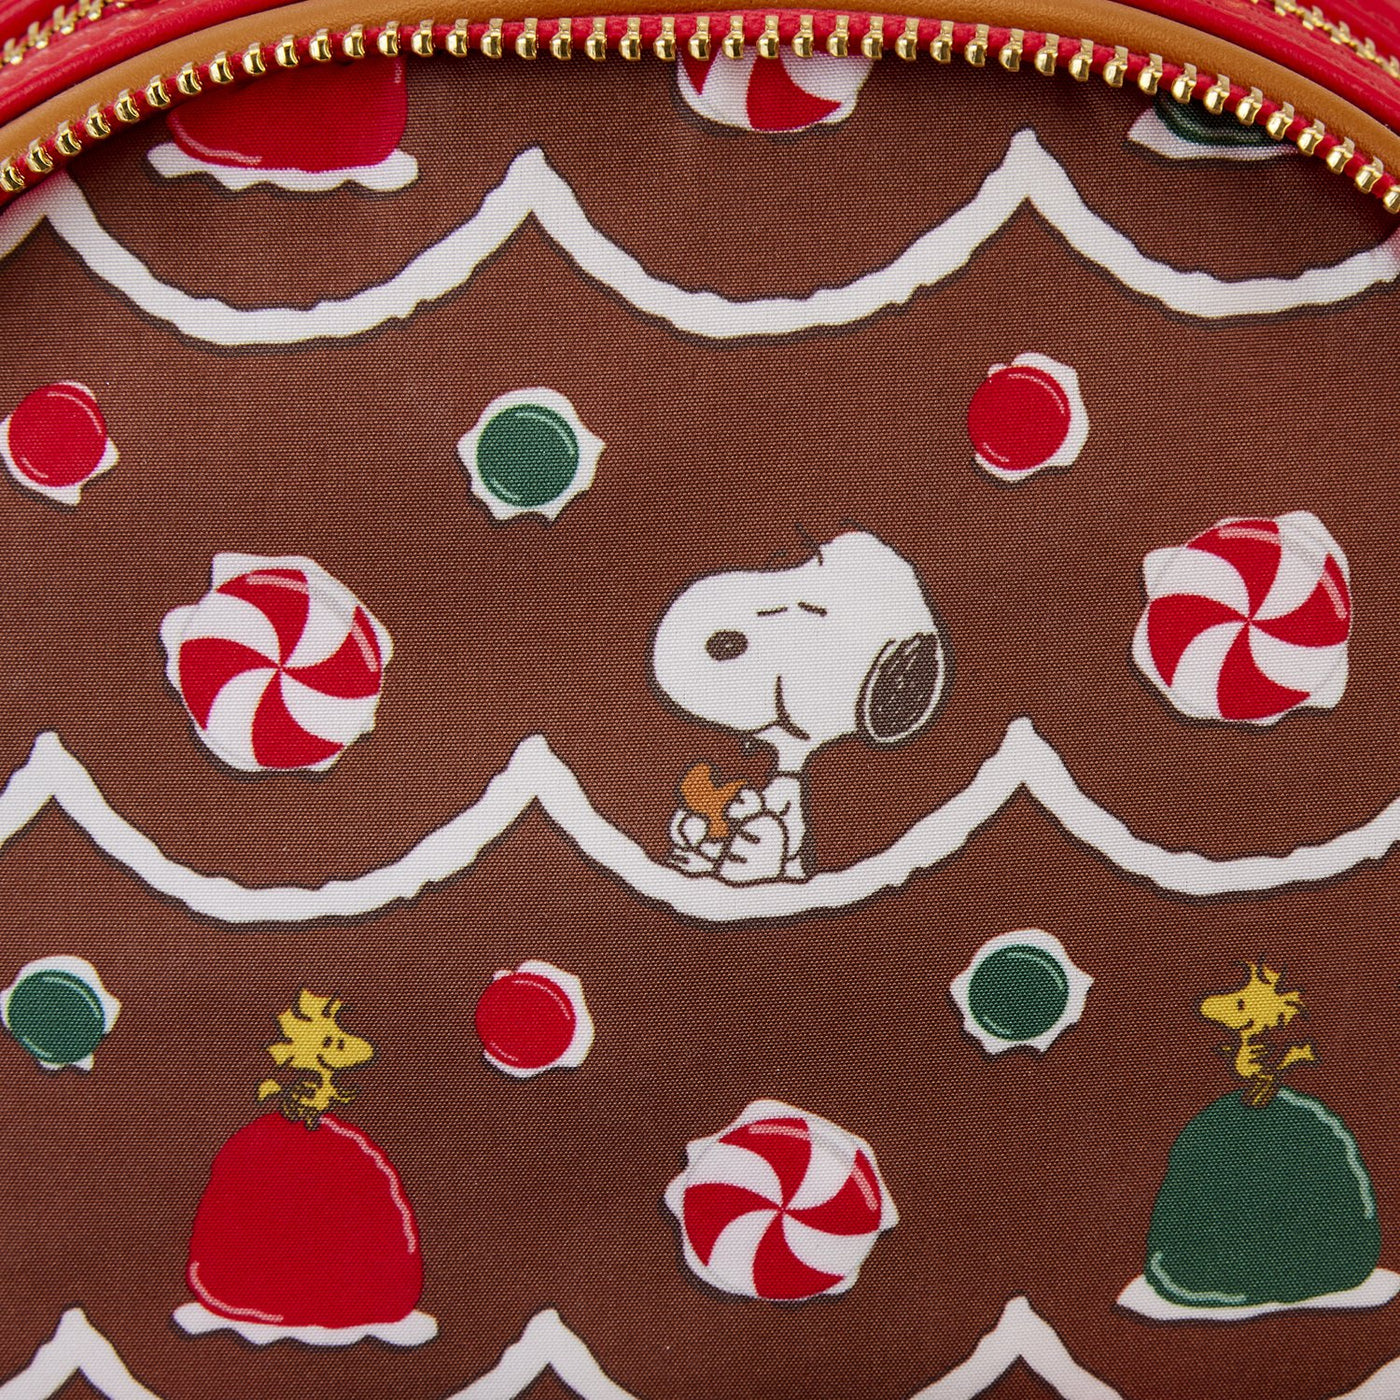 Loungefly Peanuts Snoopy Gingerbread House Mini Backpack - Interior Lining